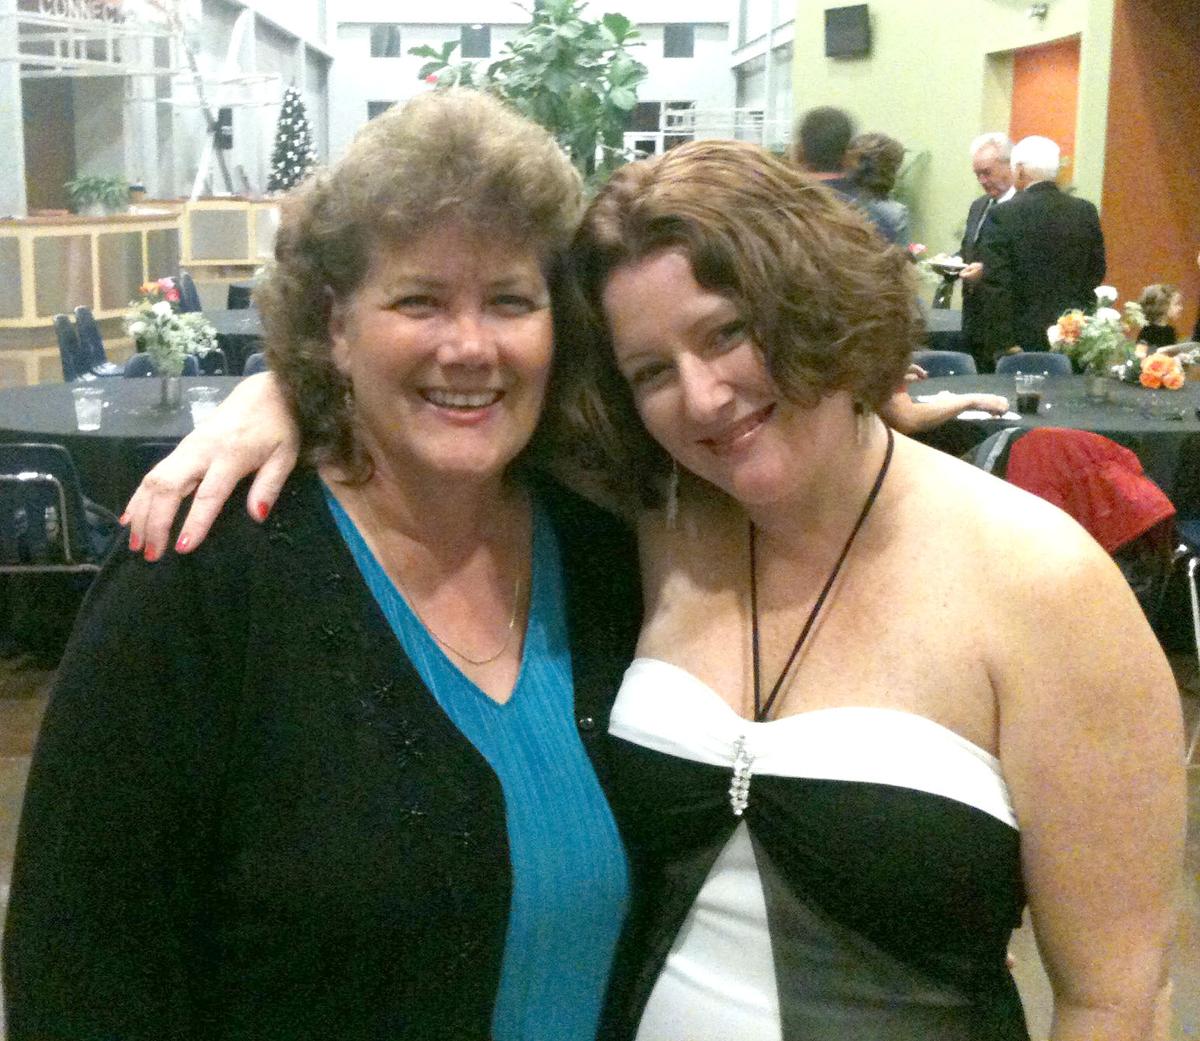 Cathi with Michael Robinson's wife, Jacki. (Courtesy of <a href="https://www.facebook.com/gmichaelrobinson">Michael Robinson</a>)